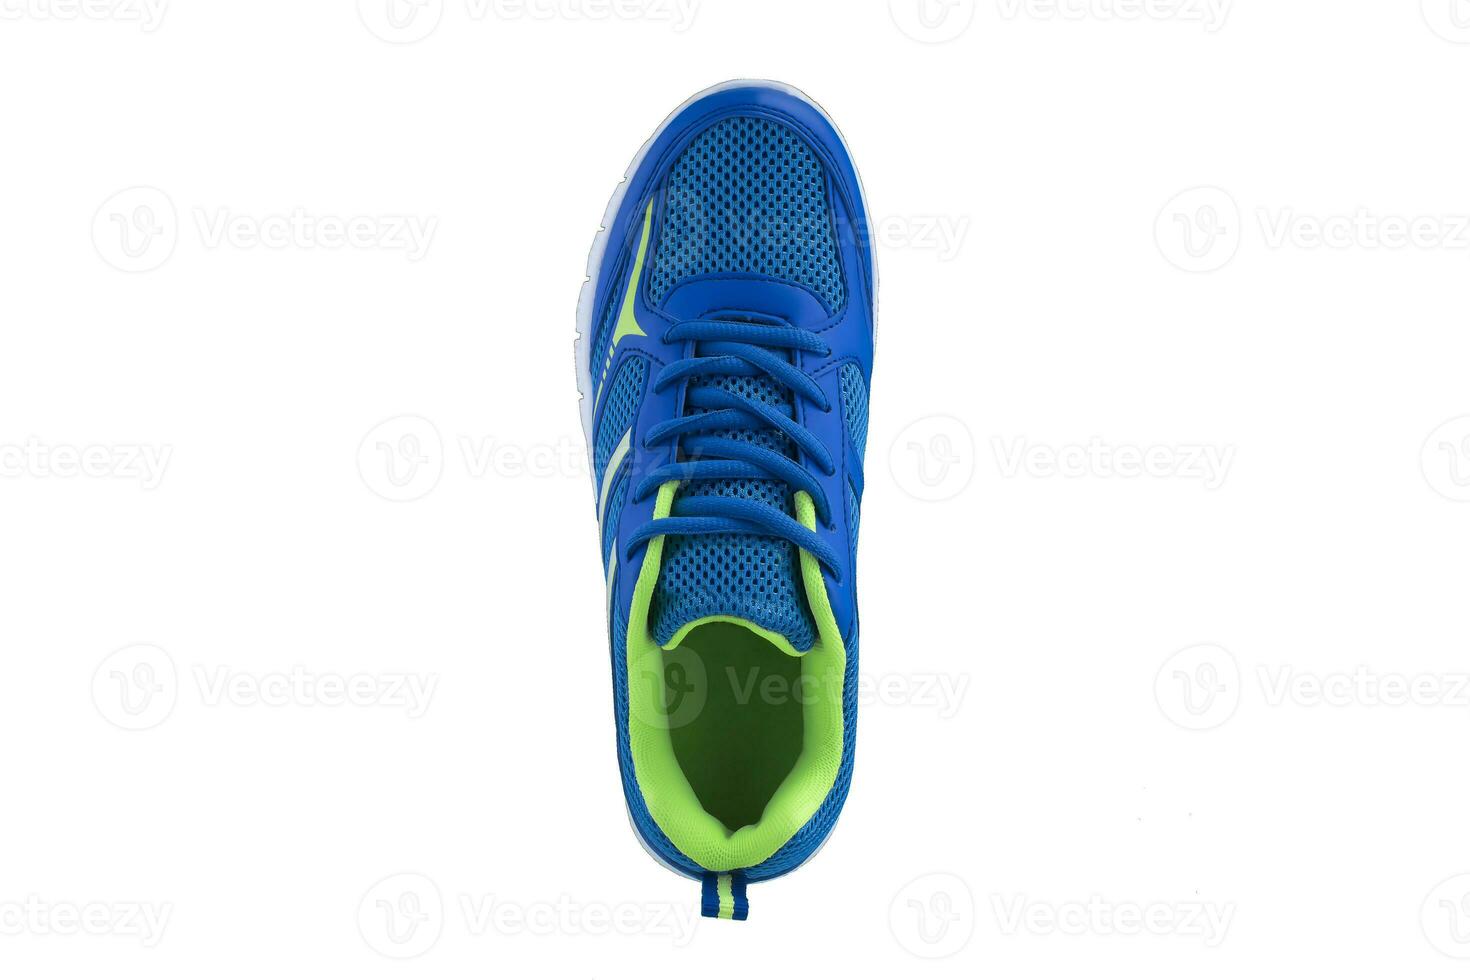 Sneakers. Blue sport shoes top view photo